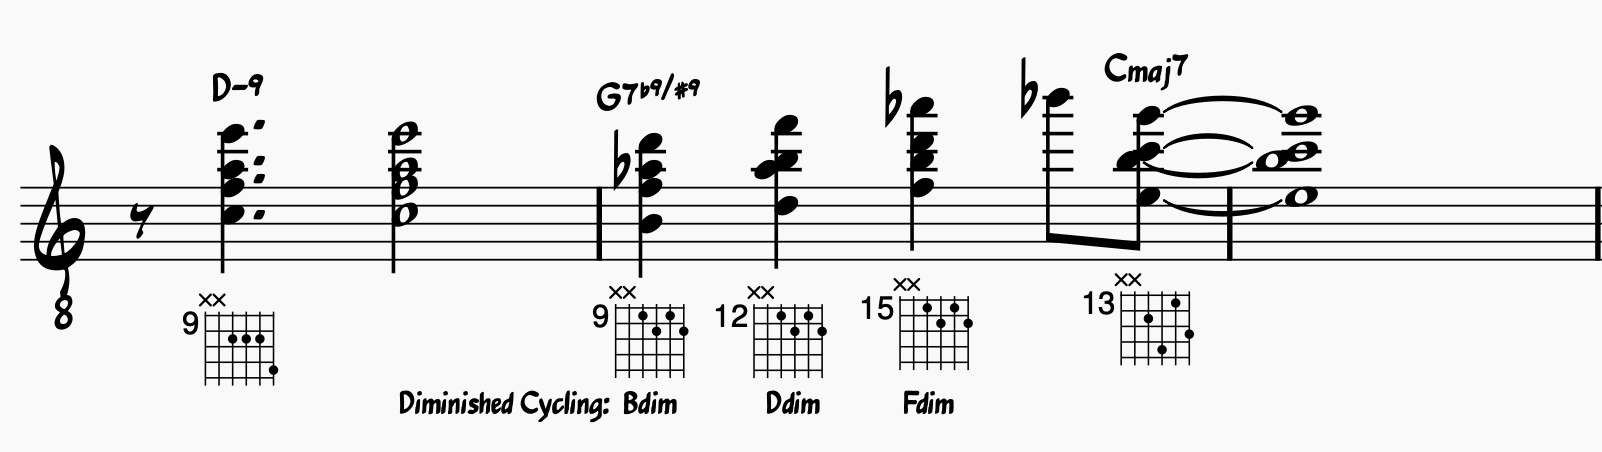 Diminished chord cycling over a ii-V-I in C major